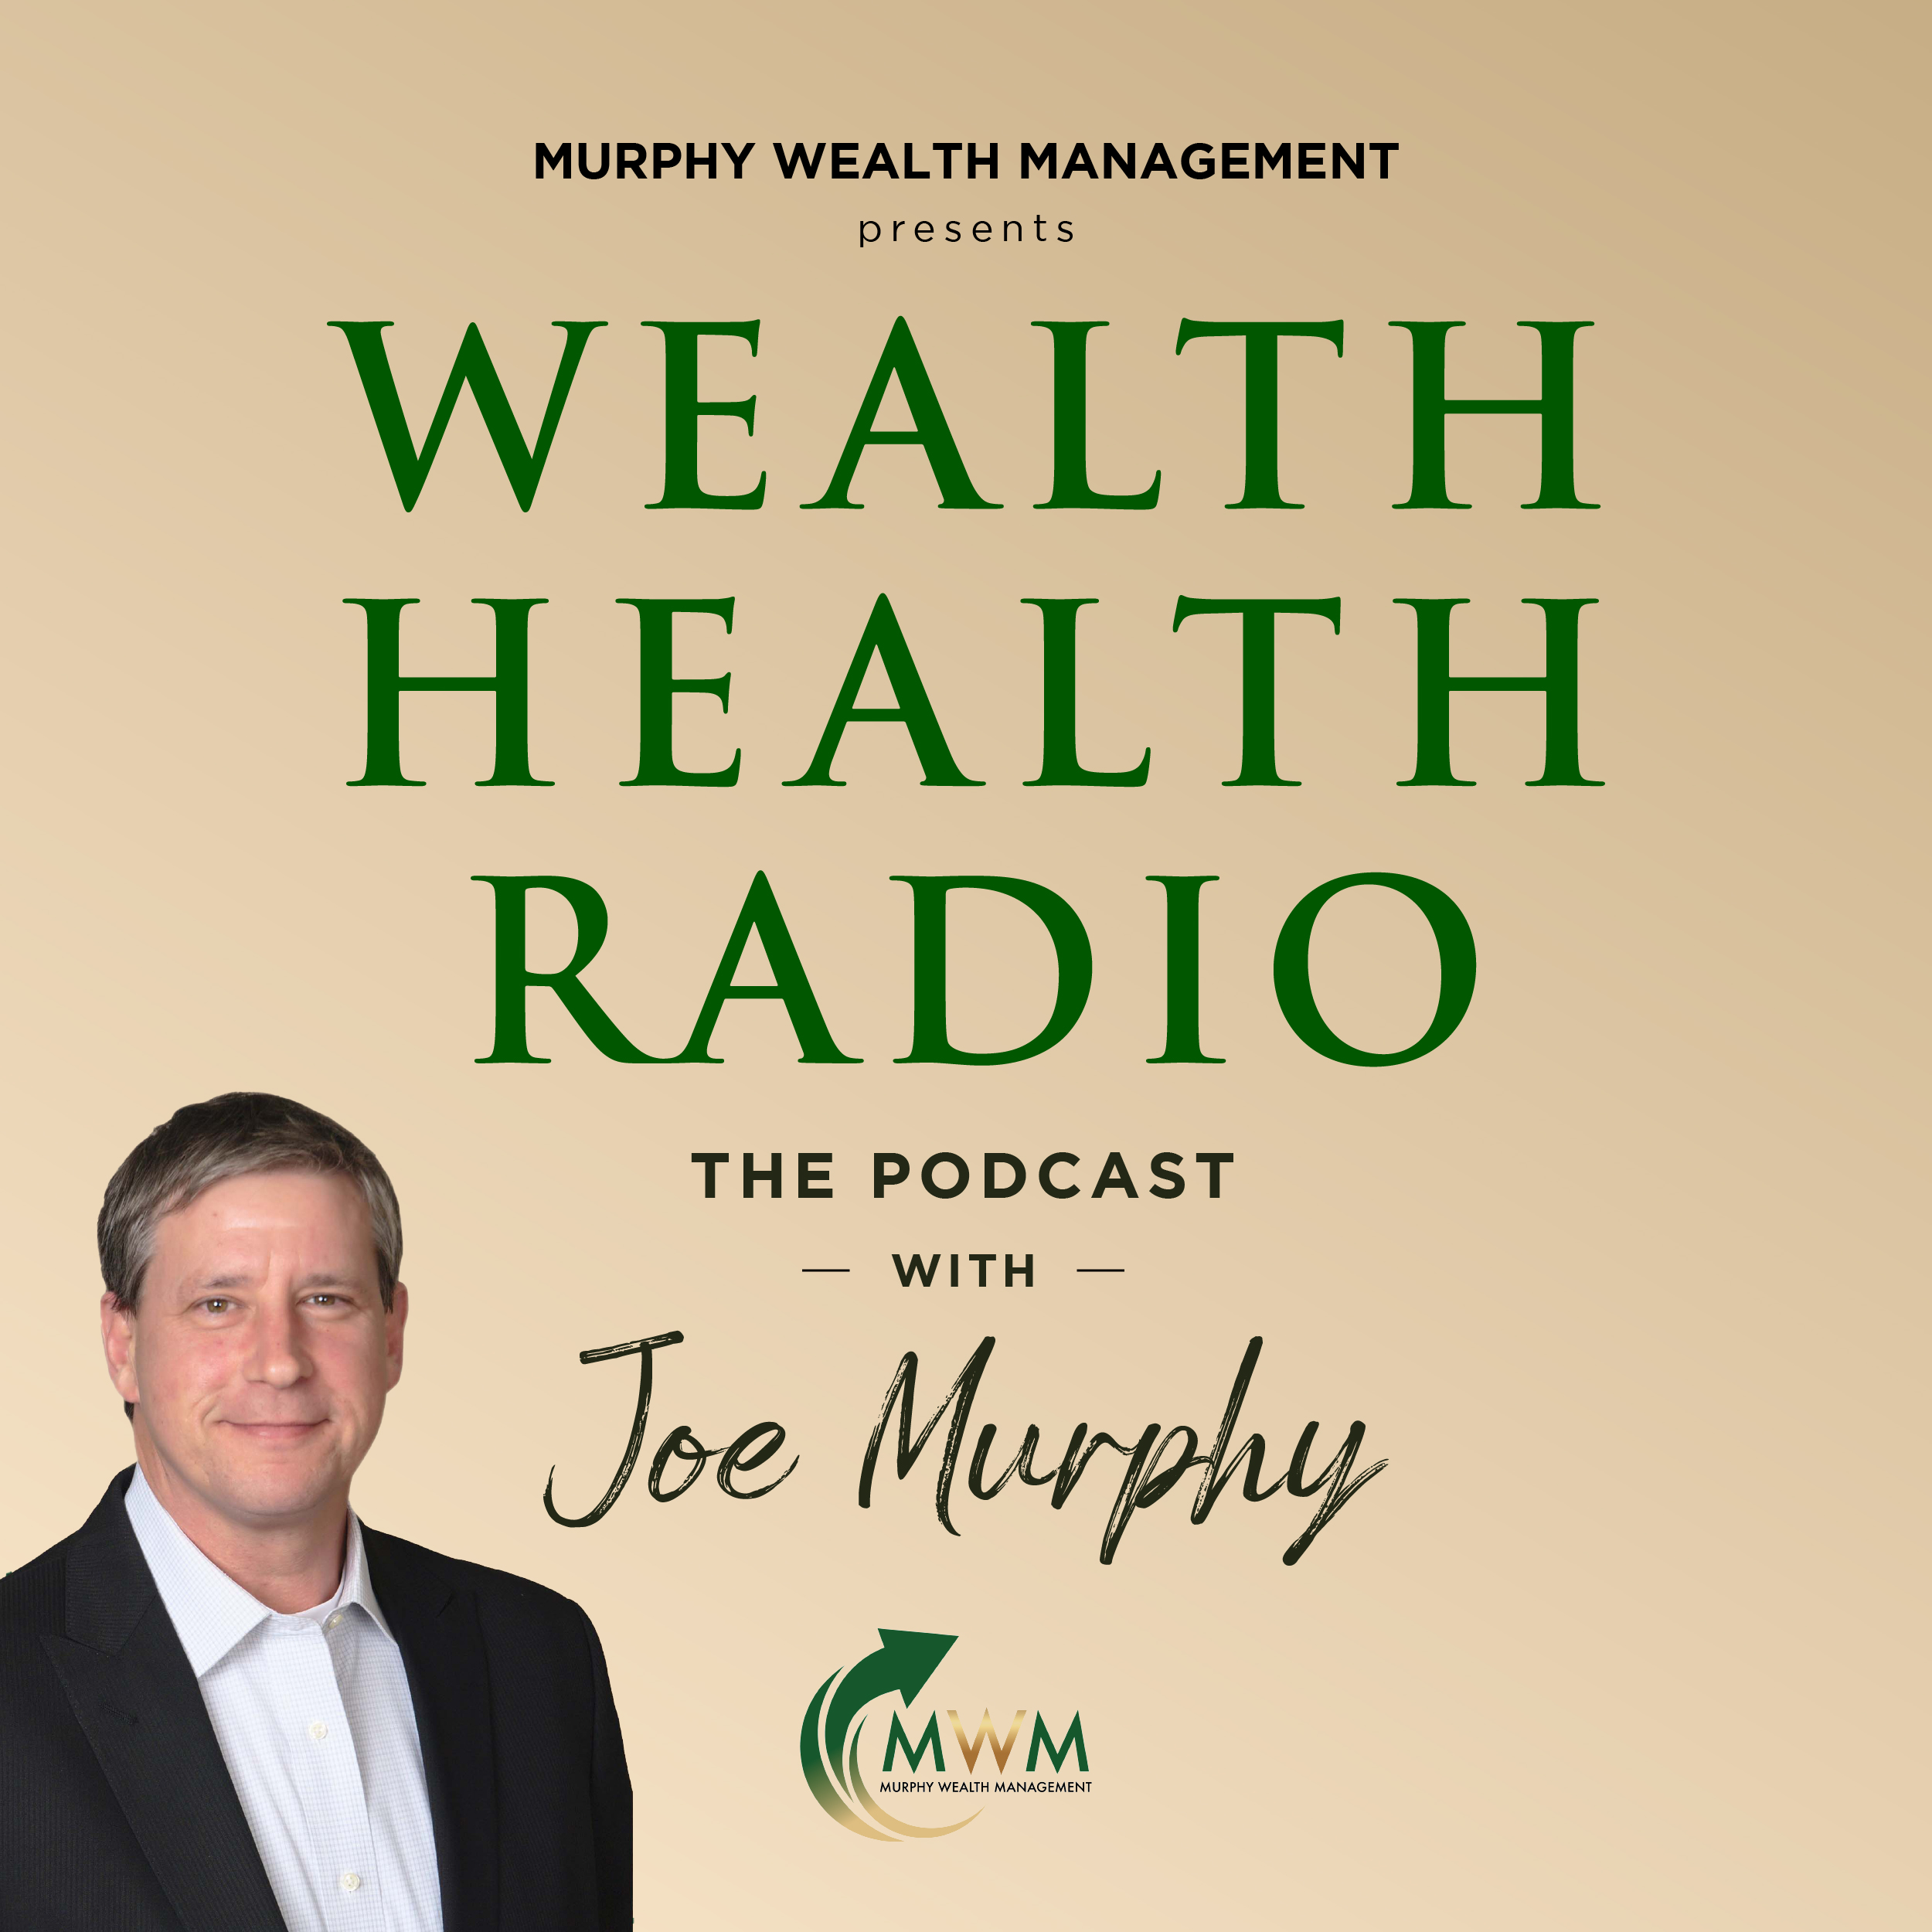 Wealth Health Radio Joe Murphy has some tips to help shore up that game plan to help you score big in retirement.